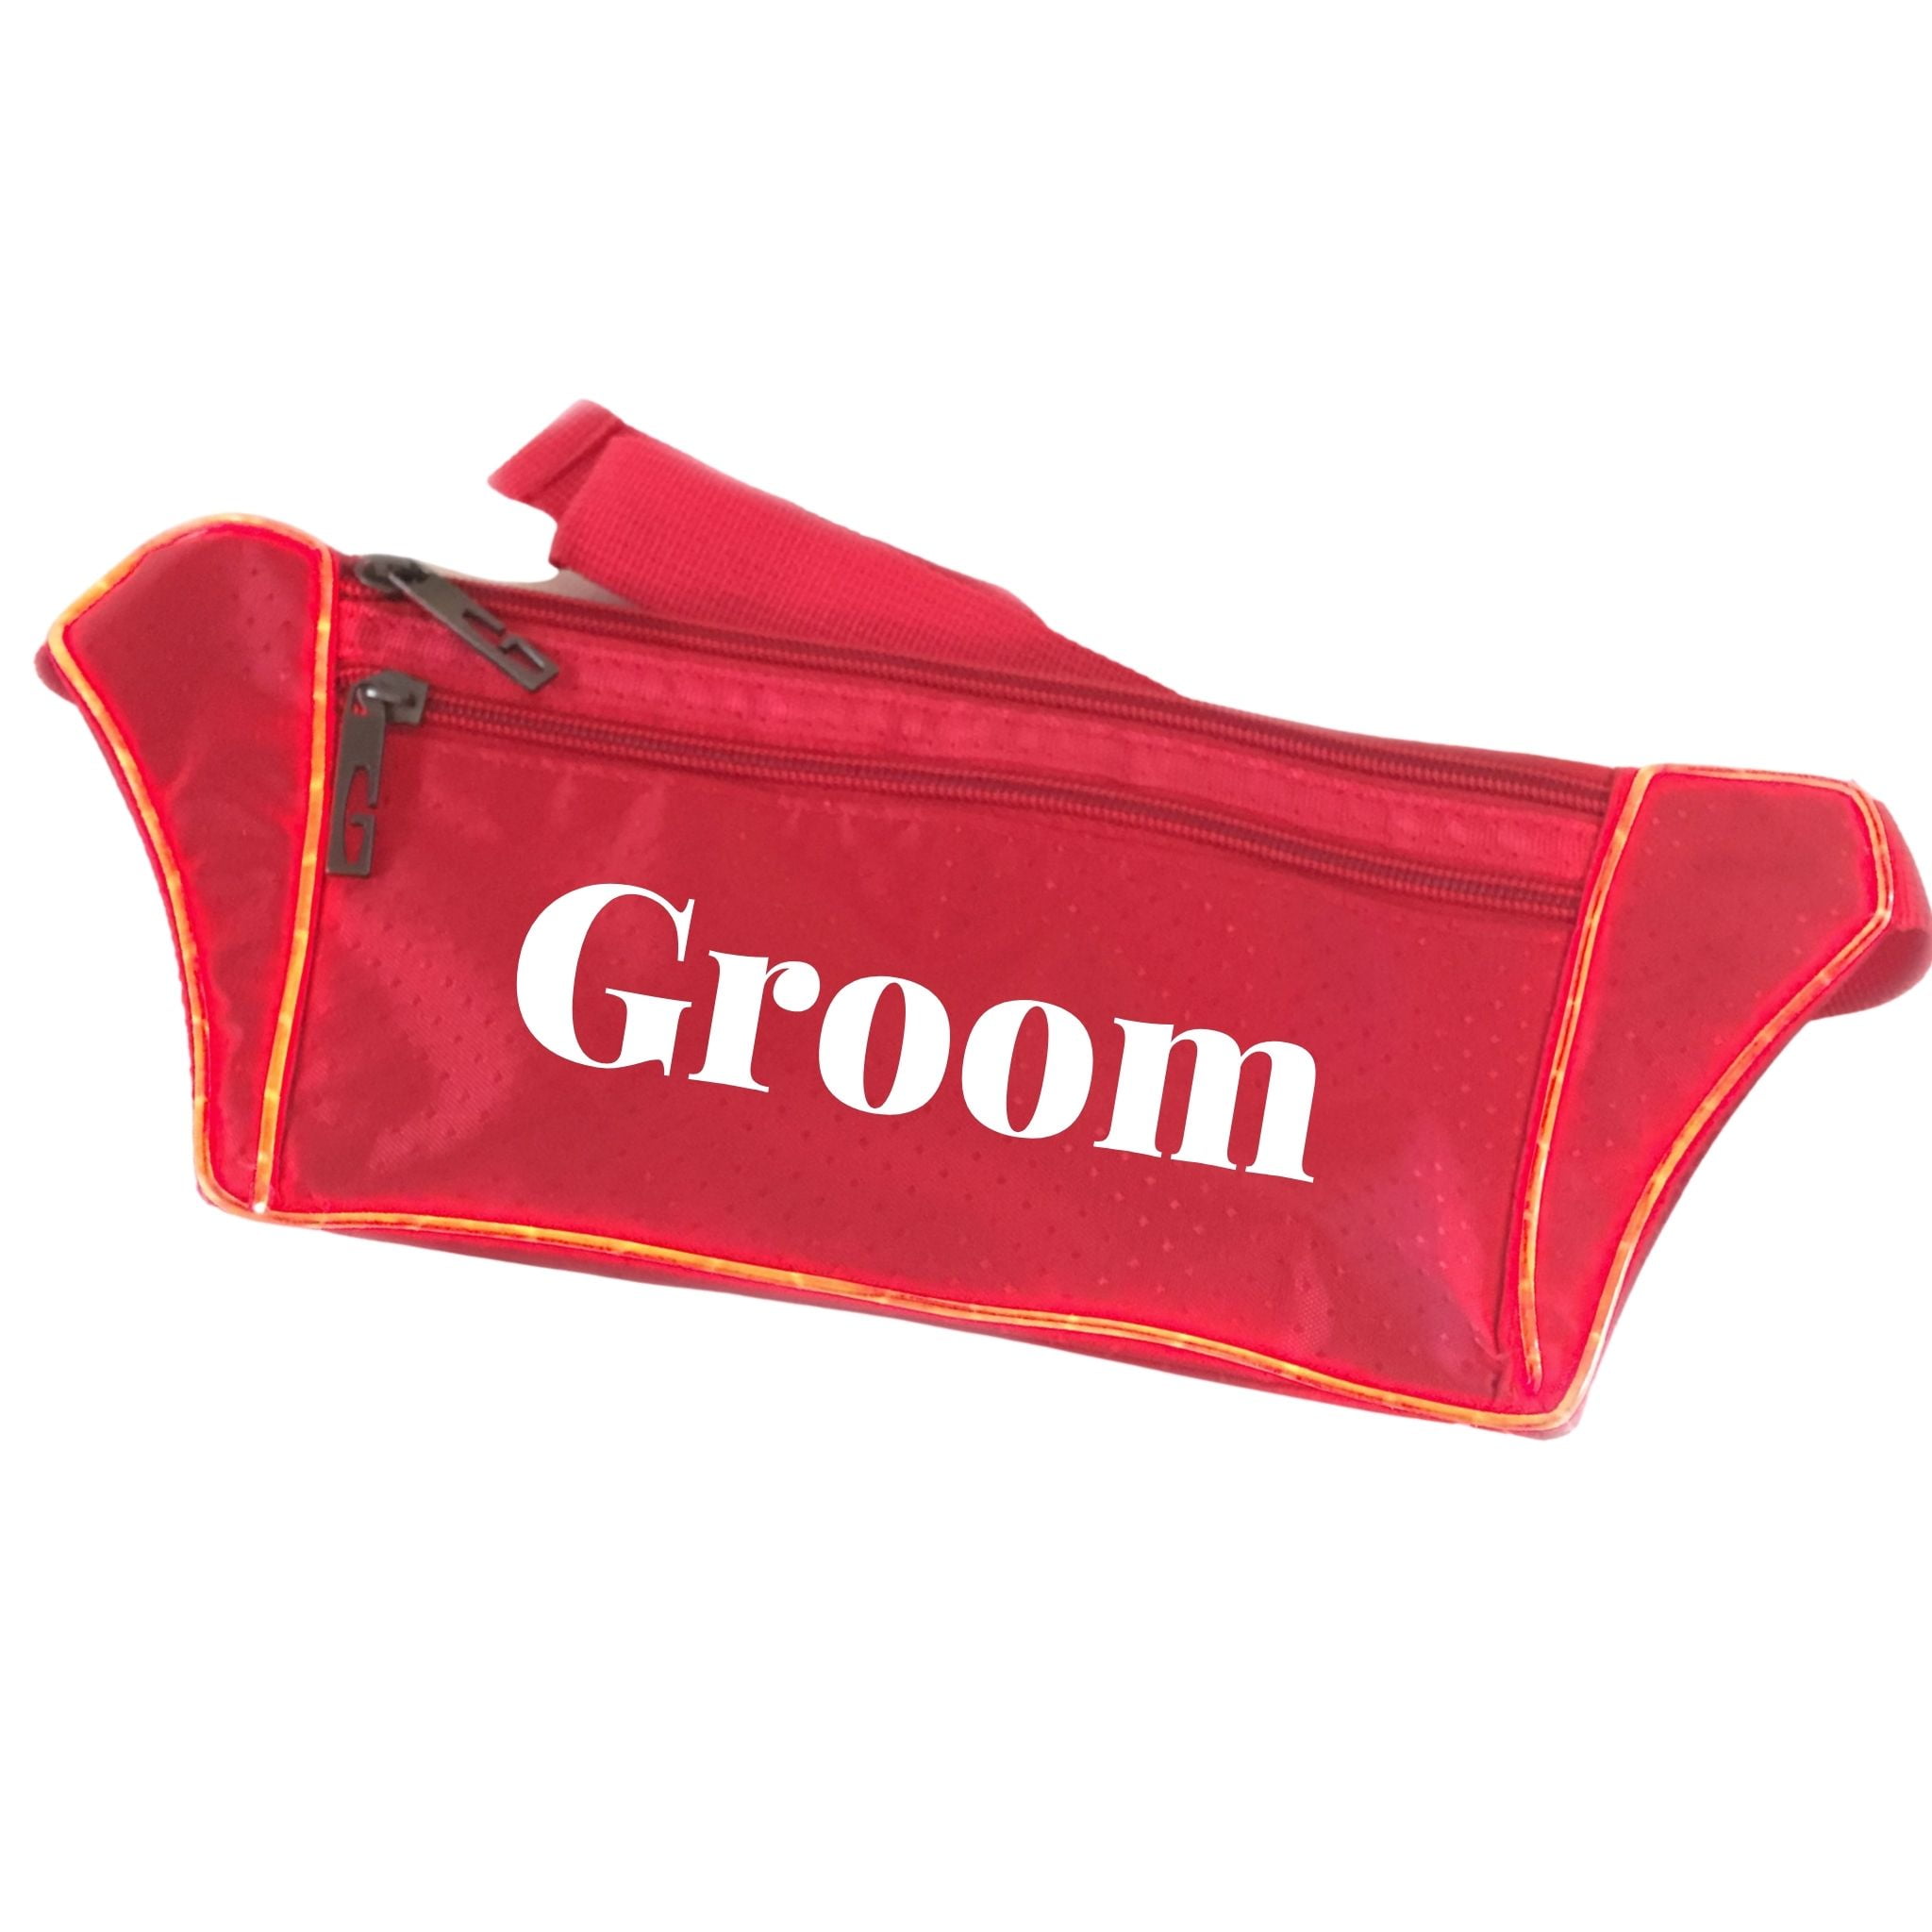 Groom Red Light Up Fanny Pack - Customized - 5 Colors - FREE - Bachelor Hip Pack - Groom Outfit - Personalized Best Man Gift - Walmart.com